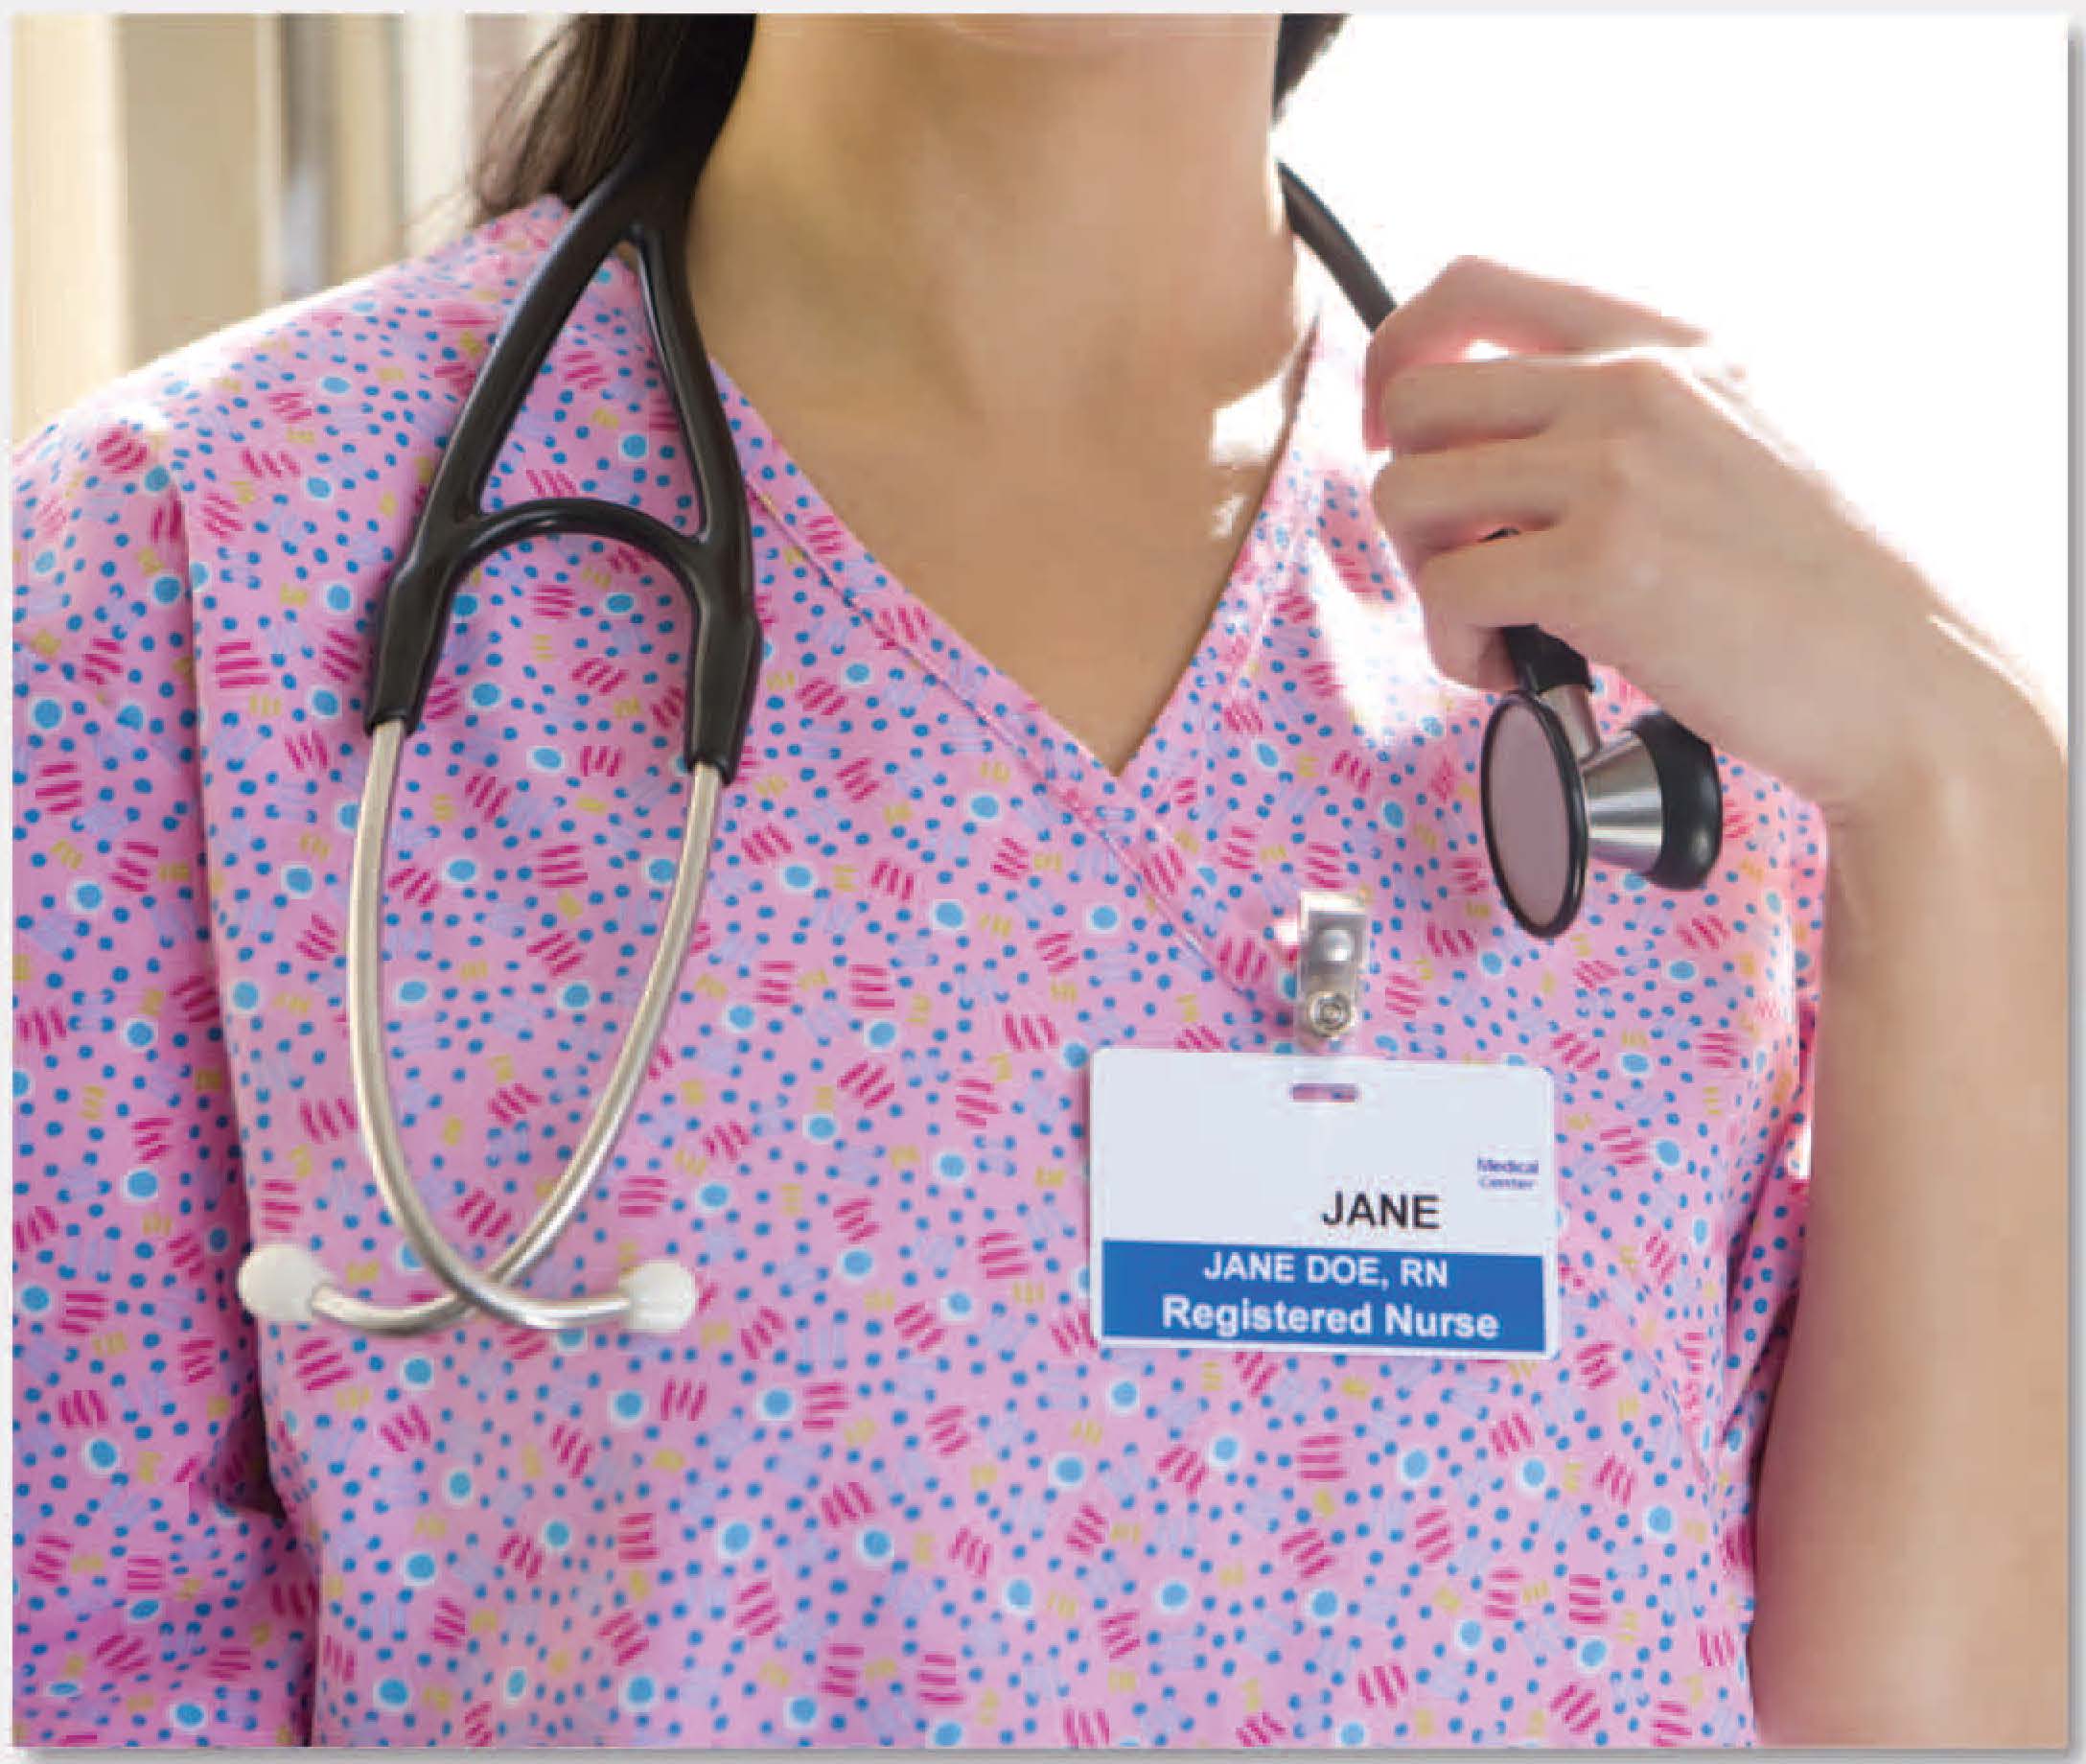 Should a nurse's full name be on an ID badge?